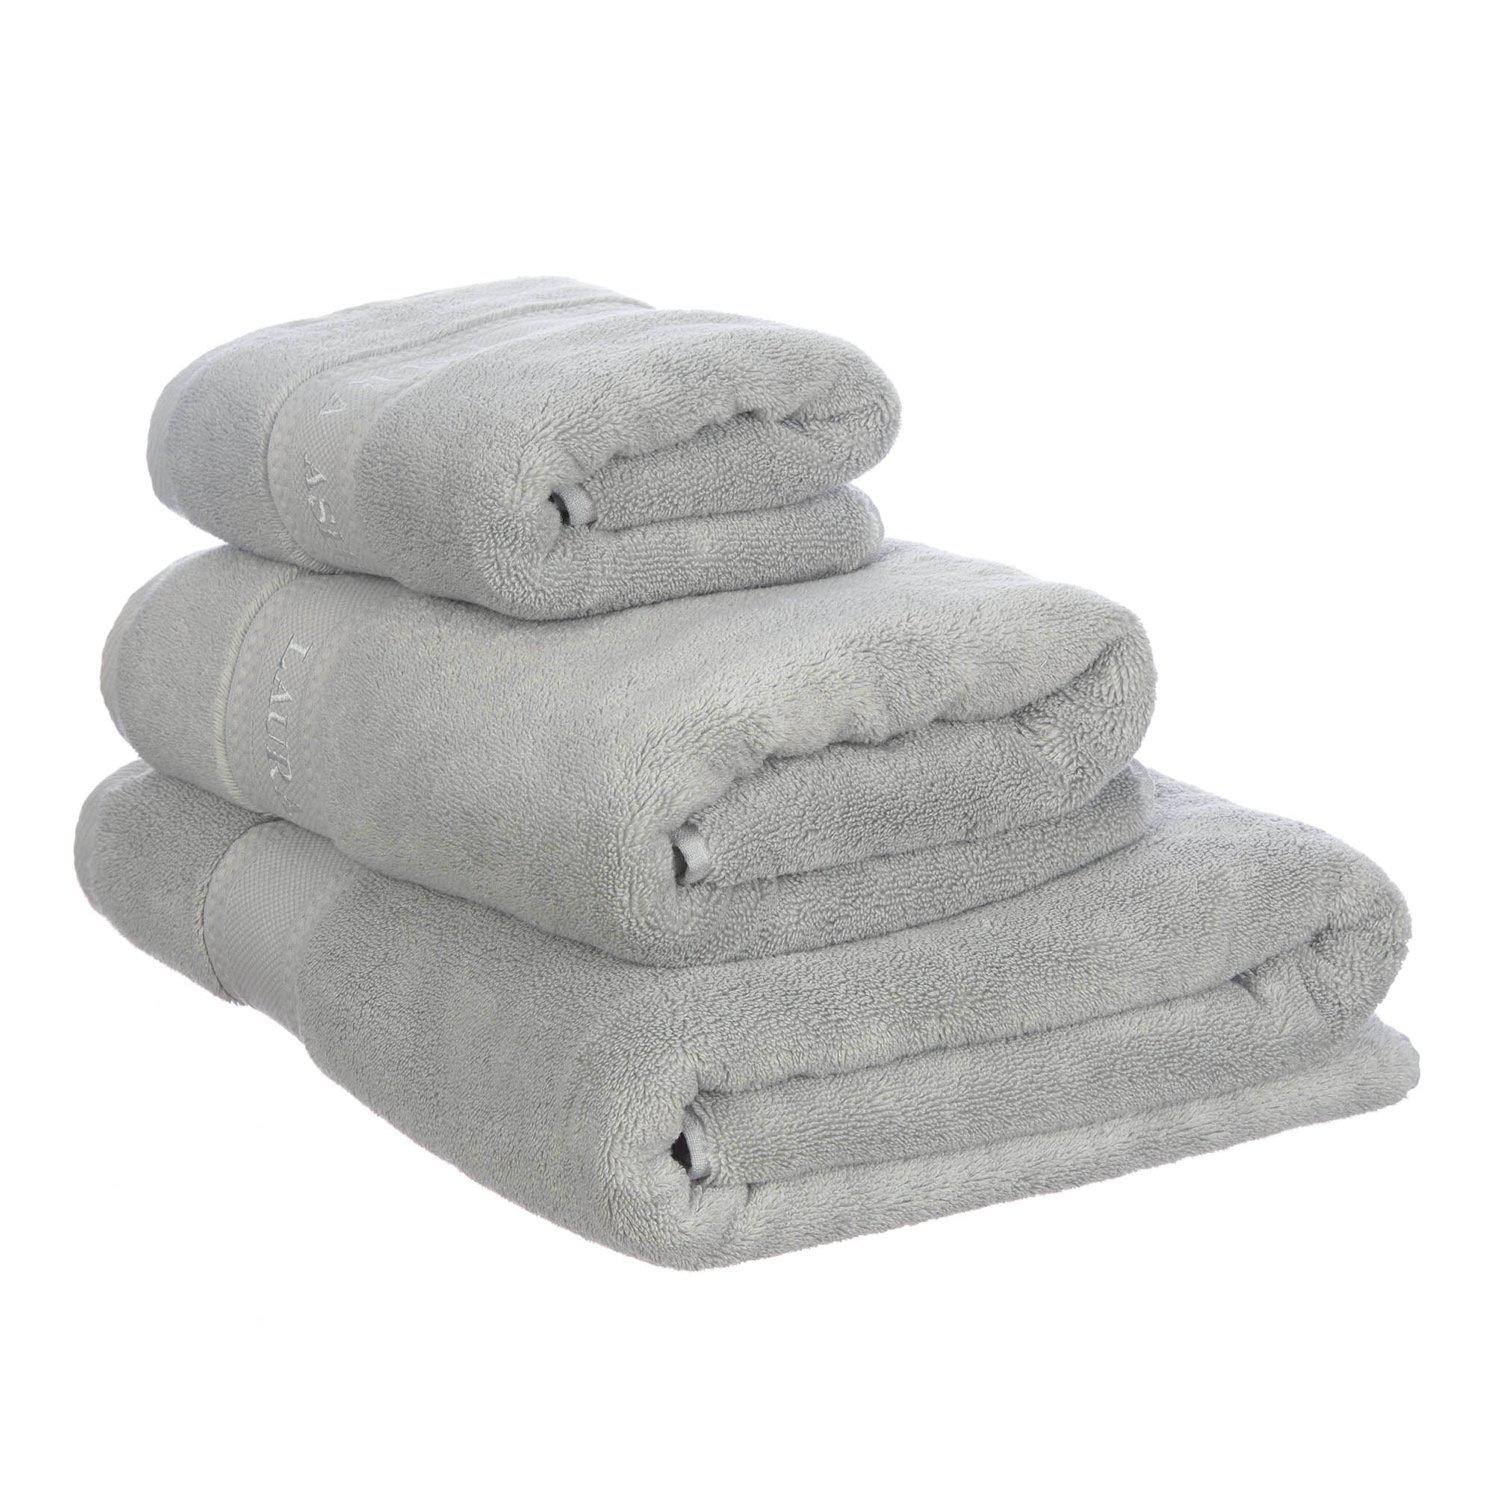 Laura Ashley Luxury Cotton Embroidered Towel - Steel-Williamsons Factory Shop